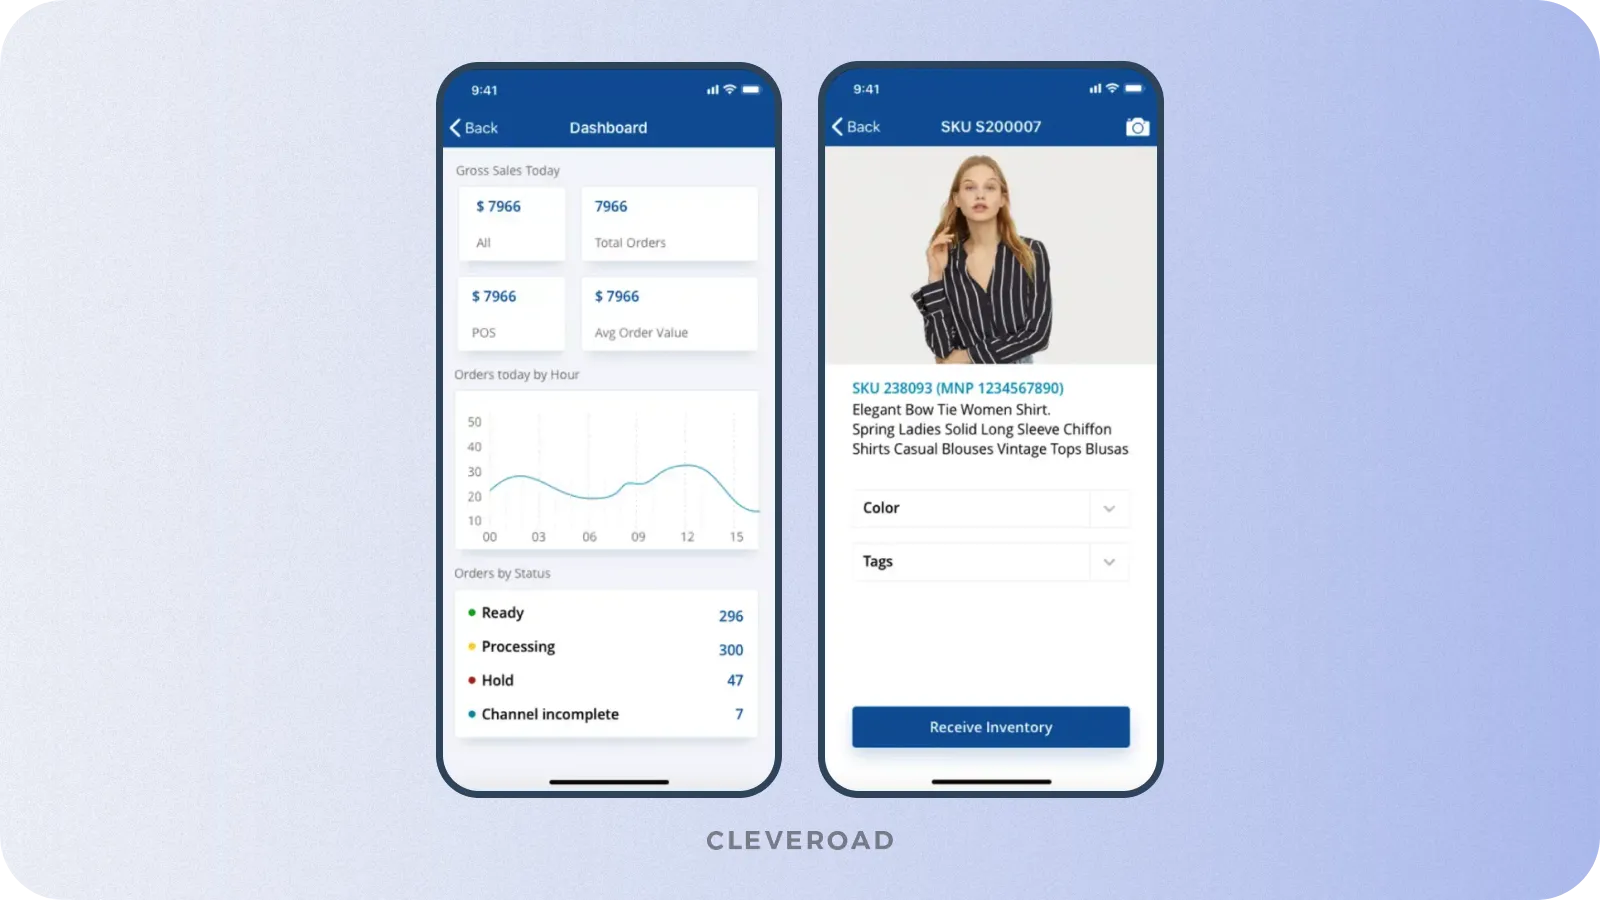 SaaS retail platform developed by Cleveroad